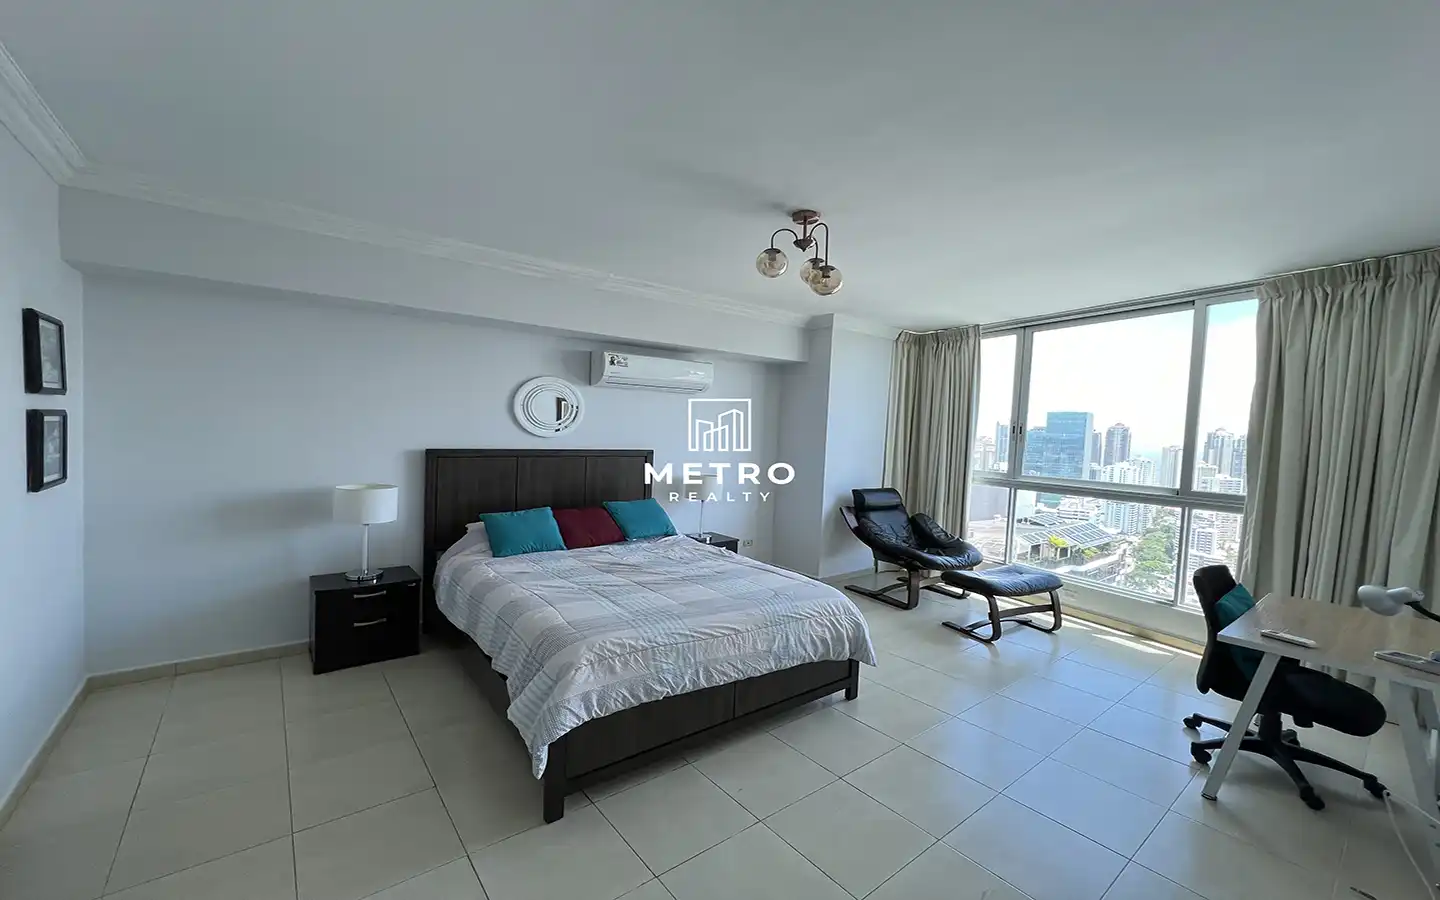 Grand Bay Tower Cinta Costera Panama Apartment for Sale master bedroom space